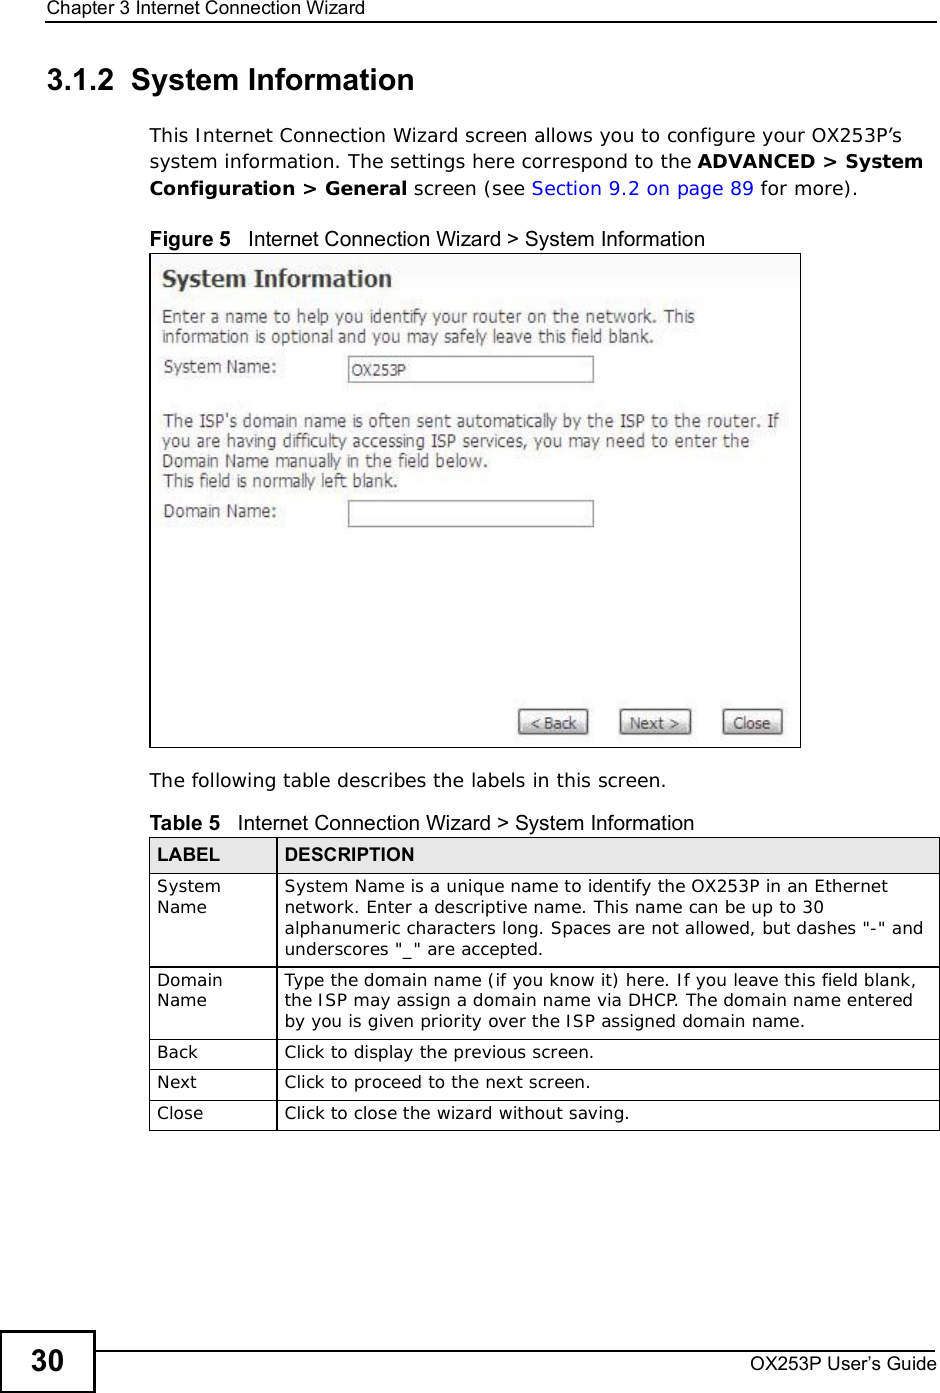 Chapter 3Internet Connection WizardOX253P User’s Guide303.1.2  System InformationThis Internet Connection Wizard screen allows you to configure your OX253P’s system information. The settings here correspond to the ADVANCED &gt; System Configuration &gt; General screen (see Section 9.2 on page 89 for more).Figure 5   Internet Connection Wizard &gt; System InformationThe following table describes the labels in this screen.Table 5   Internet Connection Wizard &gt; System InformationLABEL DESCRIPTIONSystem Name System Name is a unique name to identify the OX253P in an Ethernet network. Enter a descriptive name. This name can be up to 30 alphanumeric characters long. Spaces are not allowed, but dashes &quot;-&quot; and underscores &quot;_&quot; are accepted. DomainName Type the domain name (if you know it) here. If you leave this field blank, the ISP may assign a domain name via DHCP. The domain name entered by you is given priority over the ISP assigned domain name.Back Click to display the previous screen.Next Click to proceed to the next screen. Close Click to close the wizard without saving.